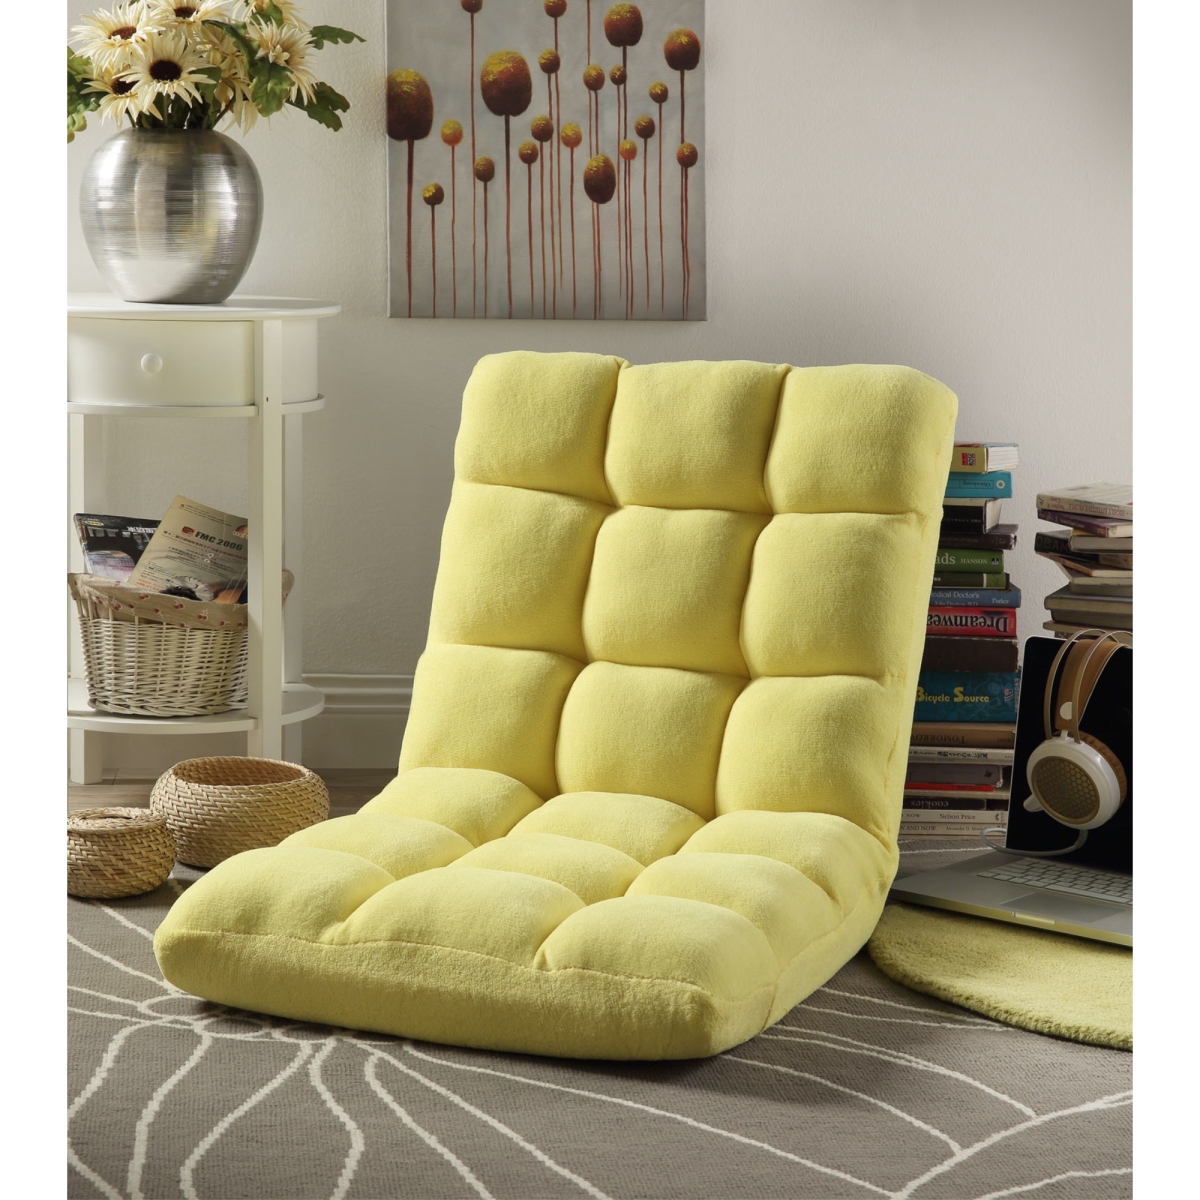 Microplush Modern Armless Quilted Recliner Chair With Foam Filling And Steel Tube Frame - Yellow